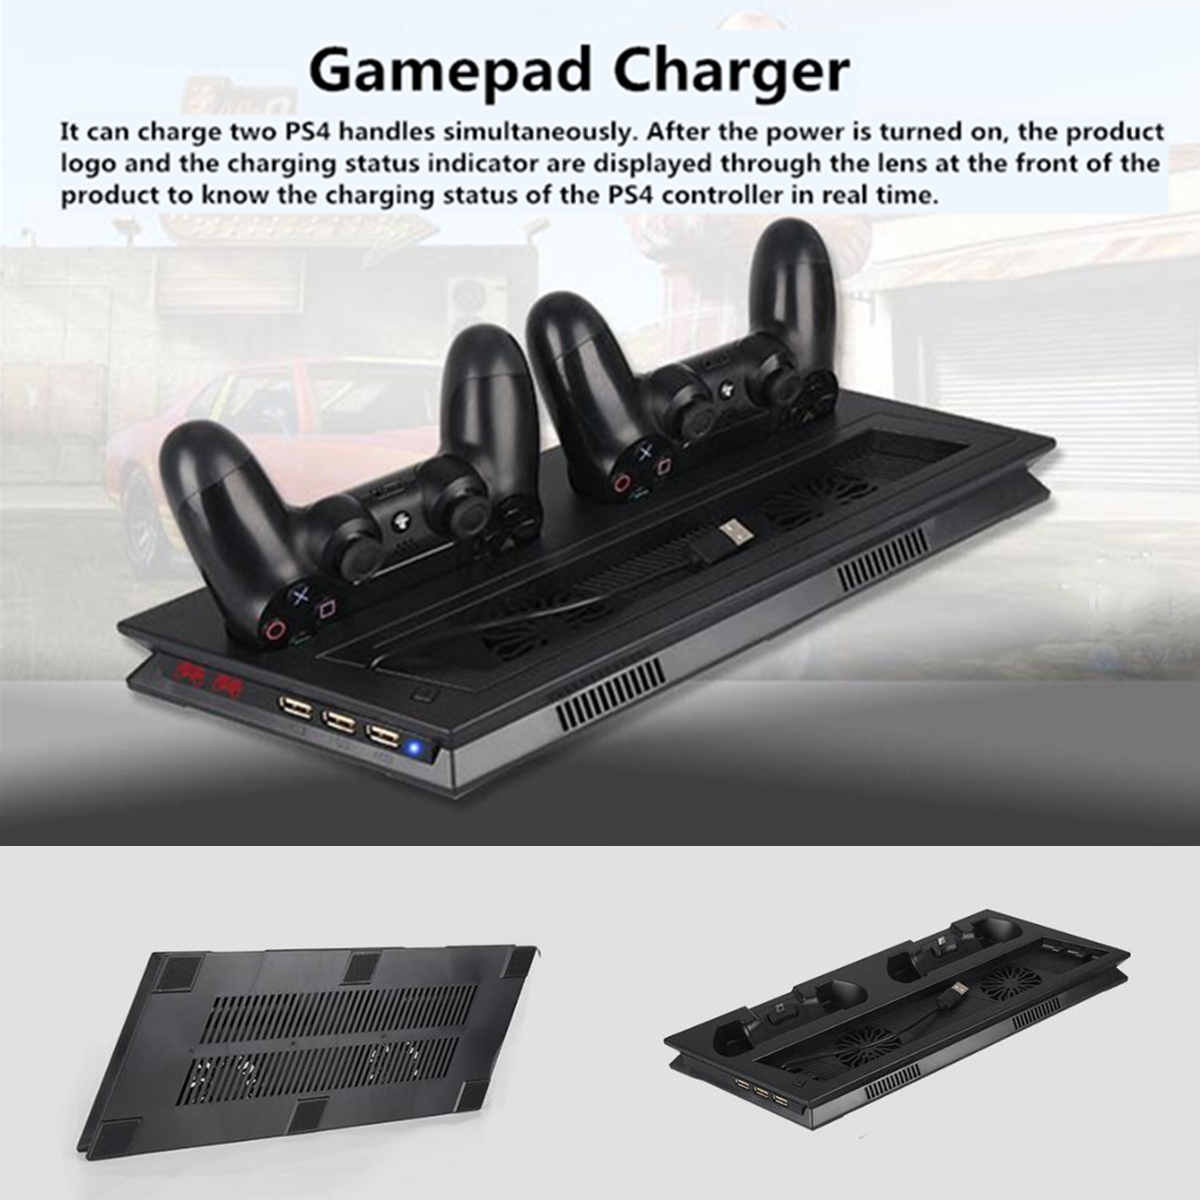 LED Charger Station Stand Charging Dock Cooling Fan for Sony Playstation 4 PS4 PRO Slim Game Console Gamepad 28